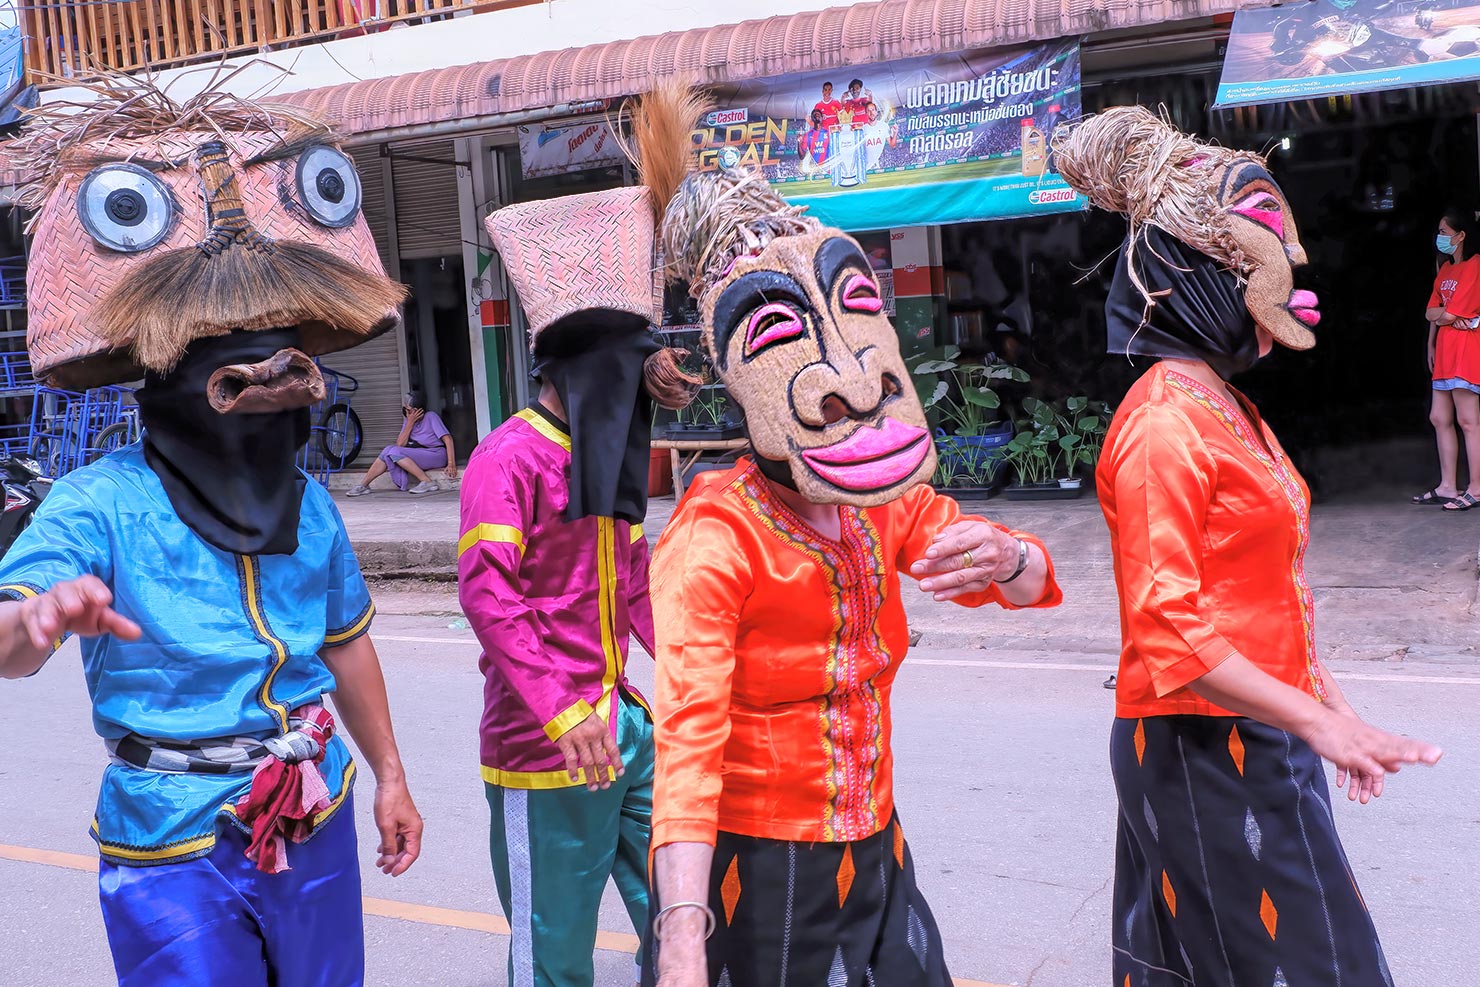 This group wears traditional costumes from northern Laos, where the festival originated